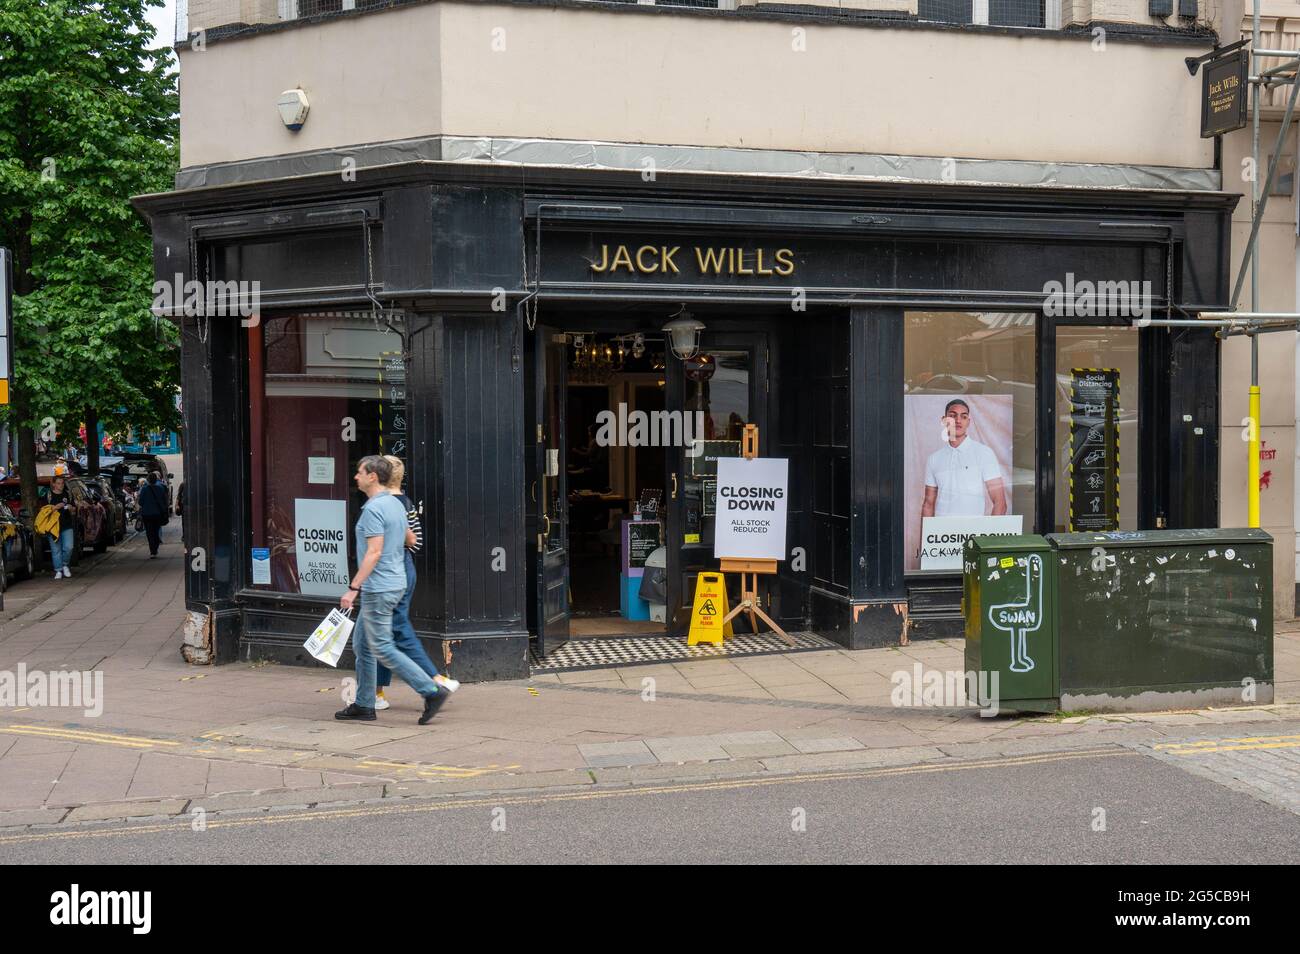 Retail shop Jack Wills closing down in Norwich city centre Stock Photo